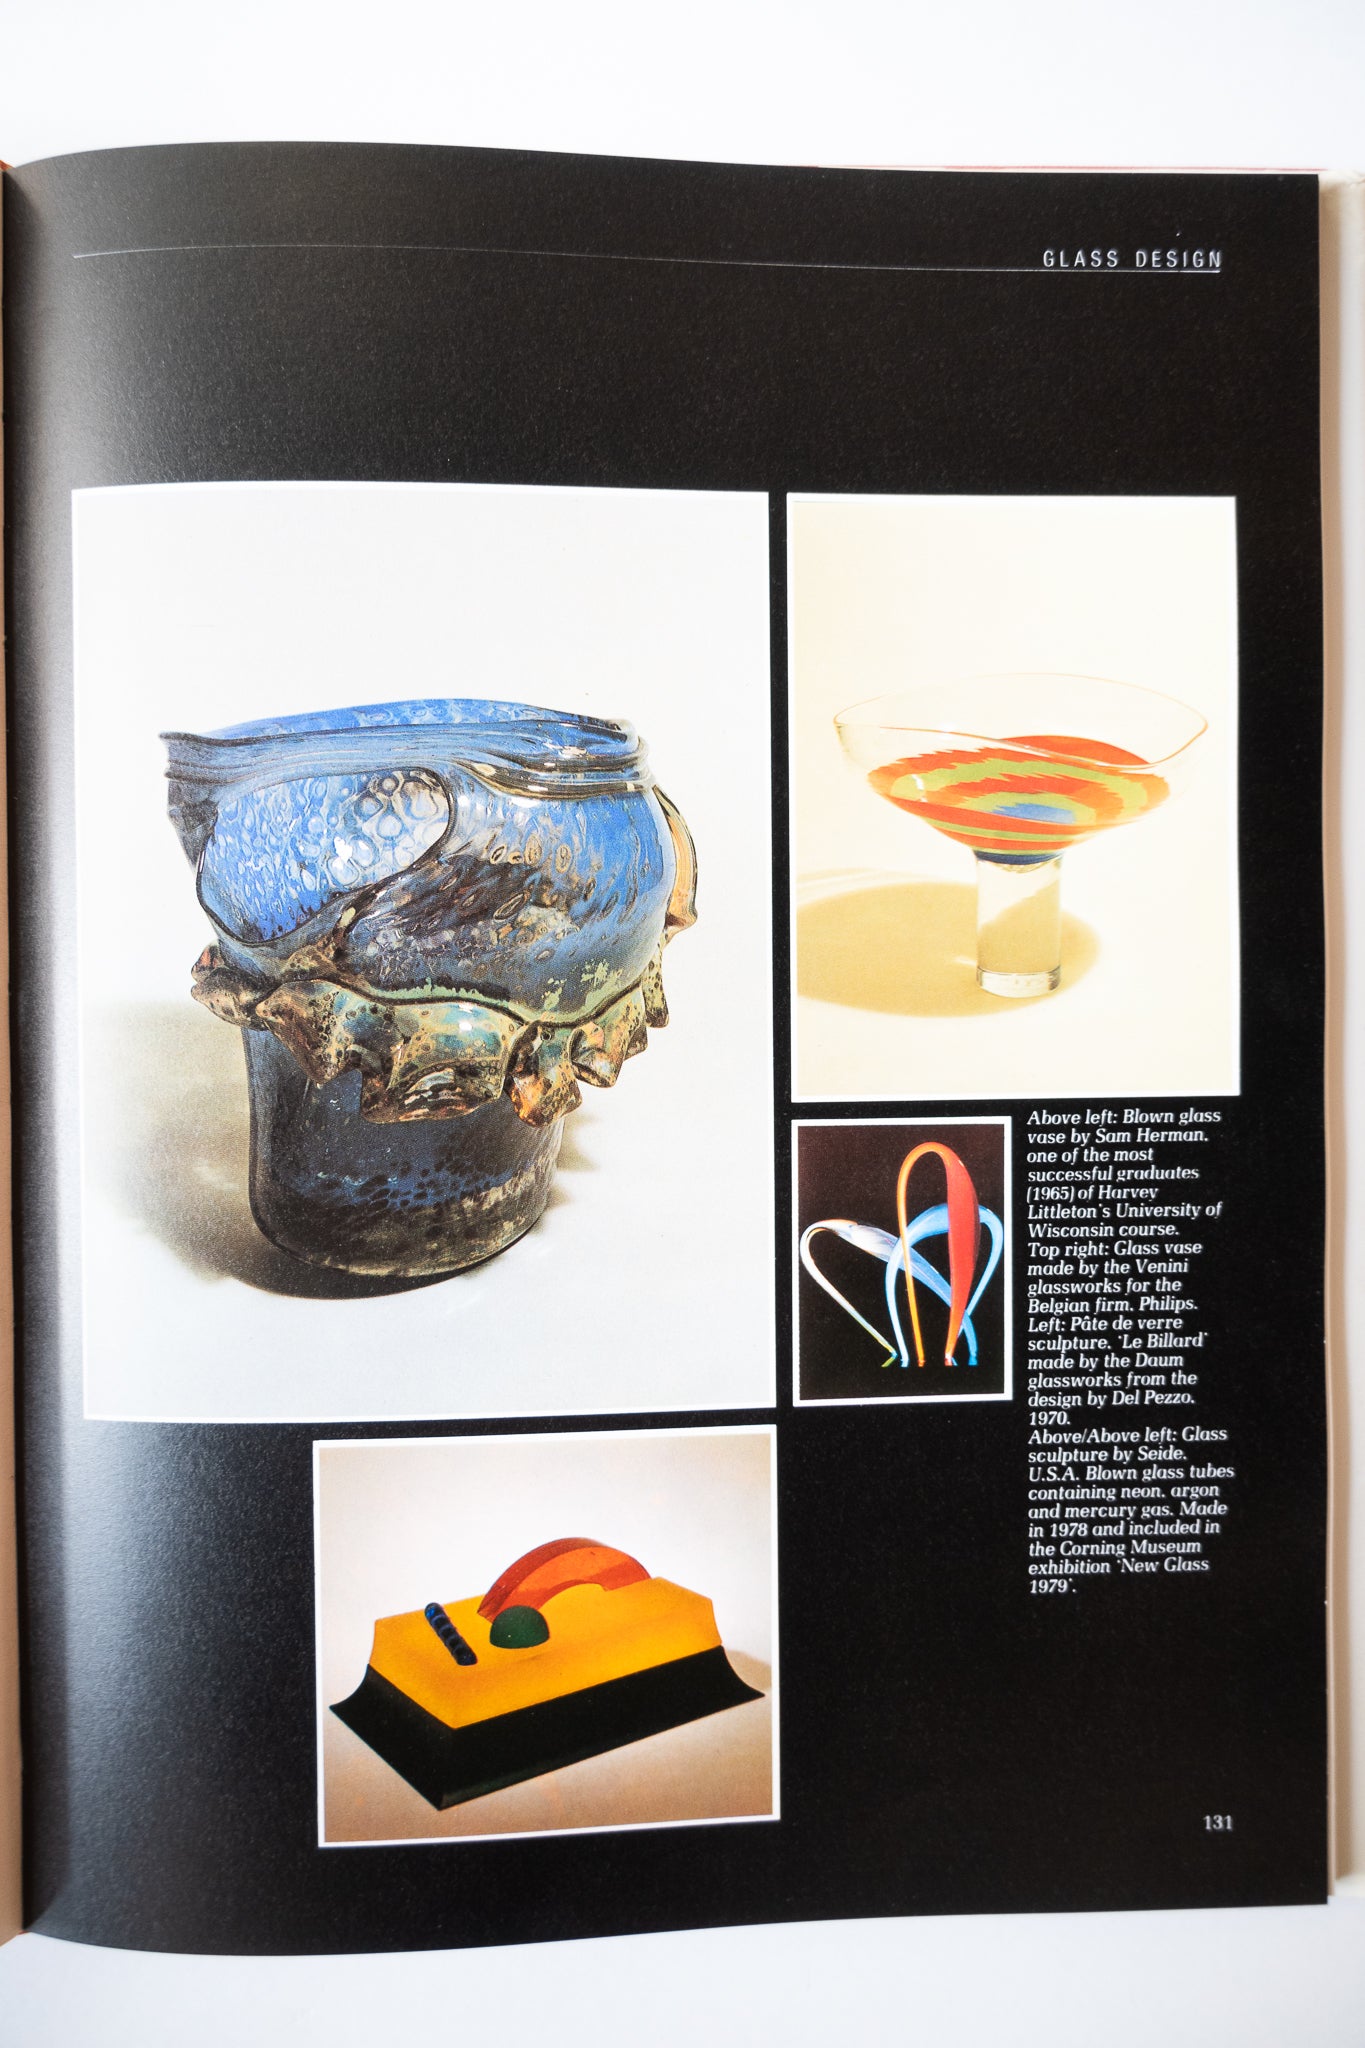 Contemporary Decorative Arts: From 1940 to Present Day, Garner, 1990